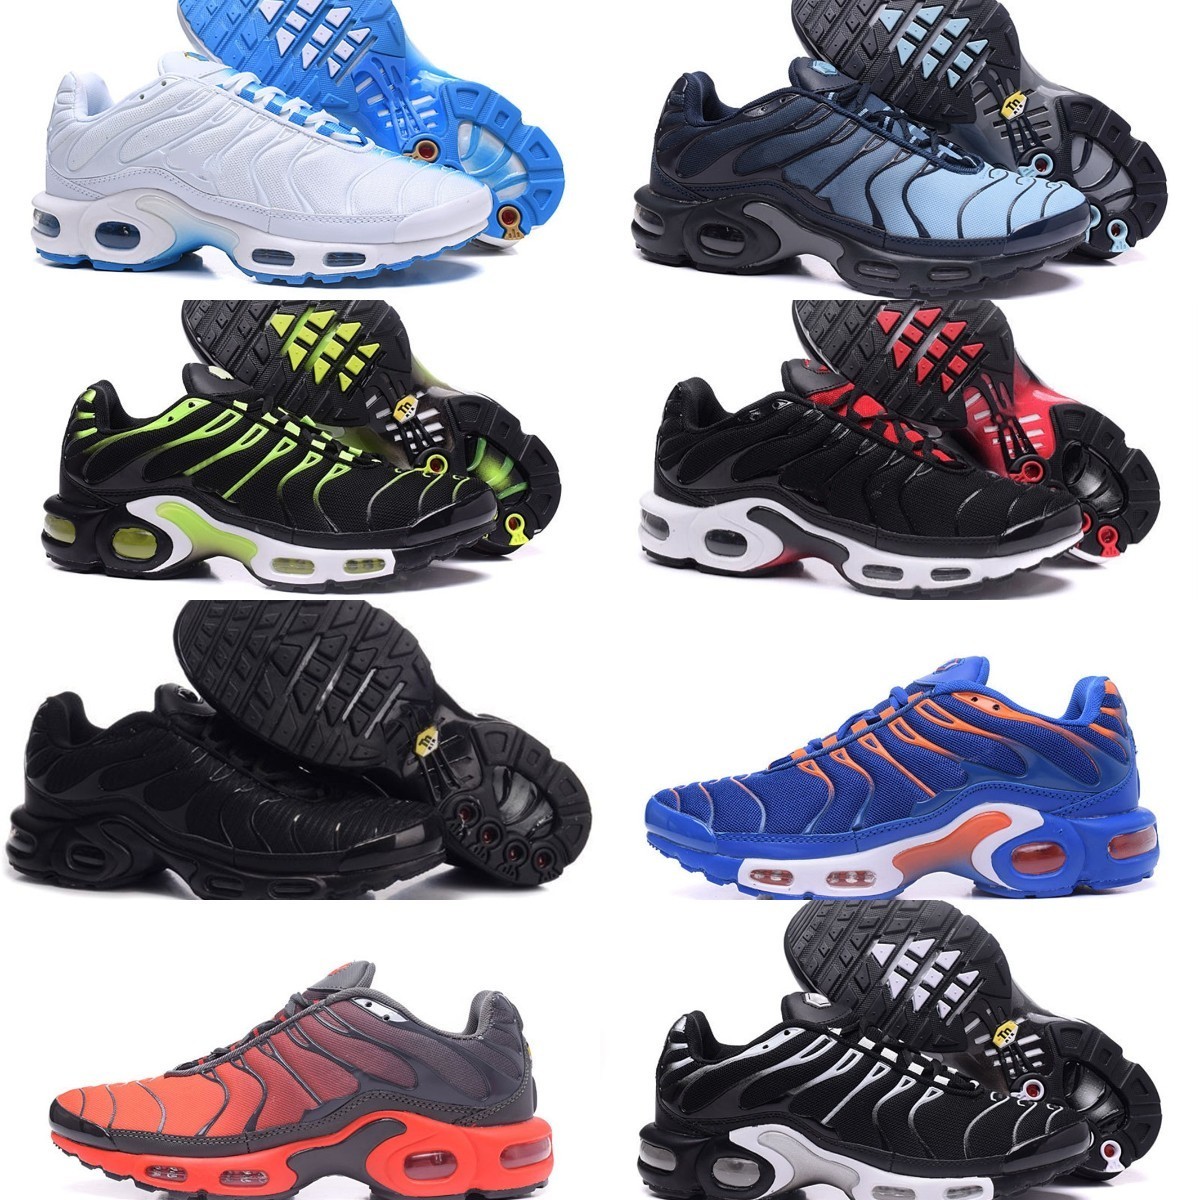 

2022 Mens Tn Running Shoes Tns OG Triple Black White Be True Plus Requin Ultra Seafoam Grey Frost Pink Teal Volt Blue Crinkled Metal Airs Chaussures Designer Sneakers, Please contact us